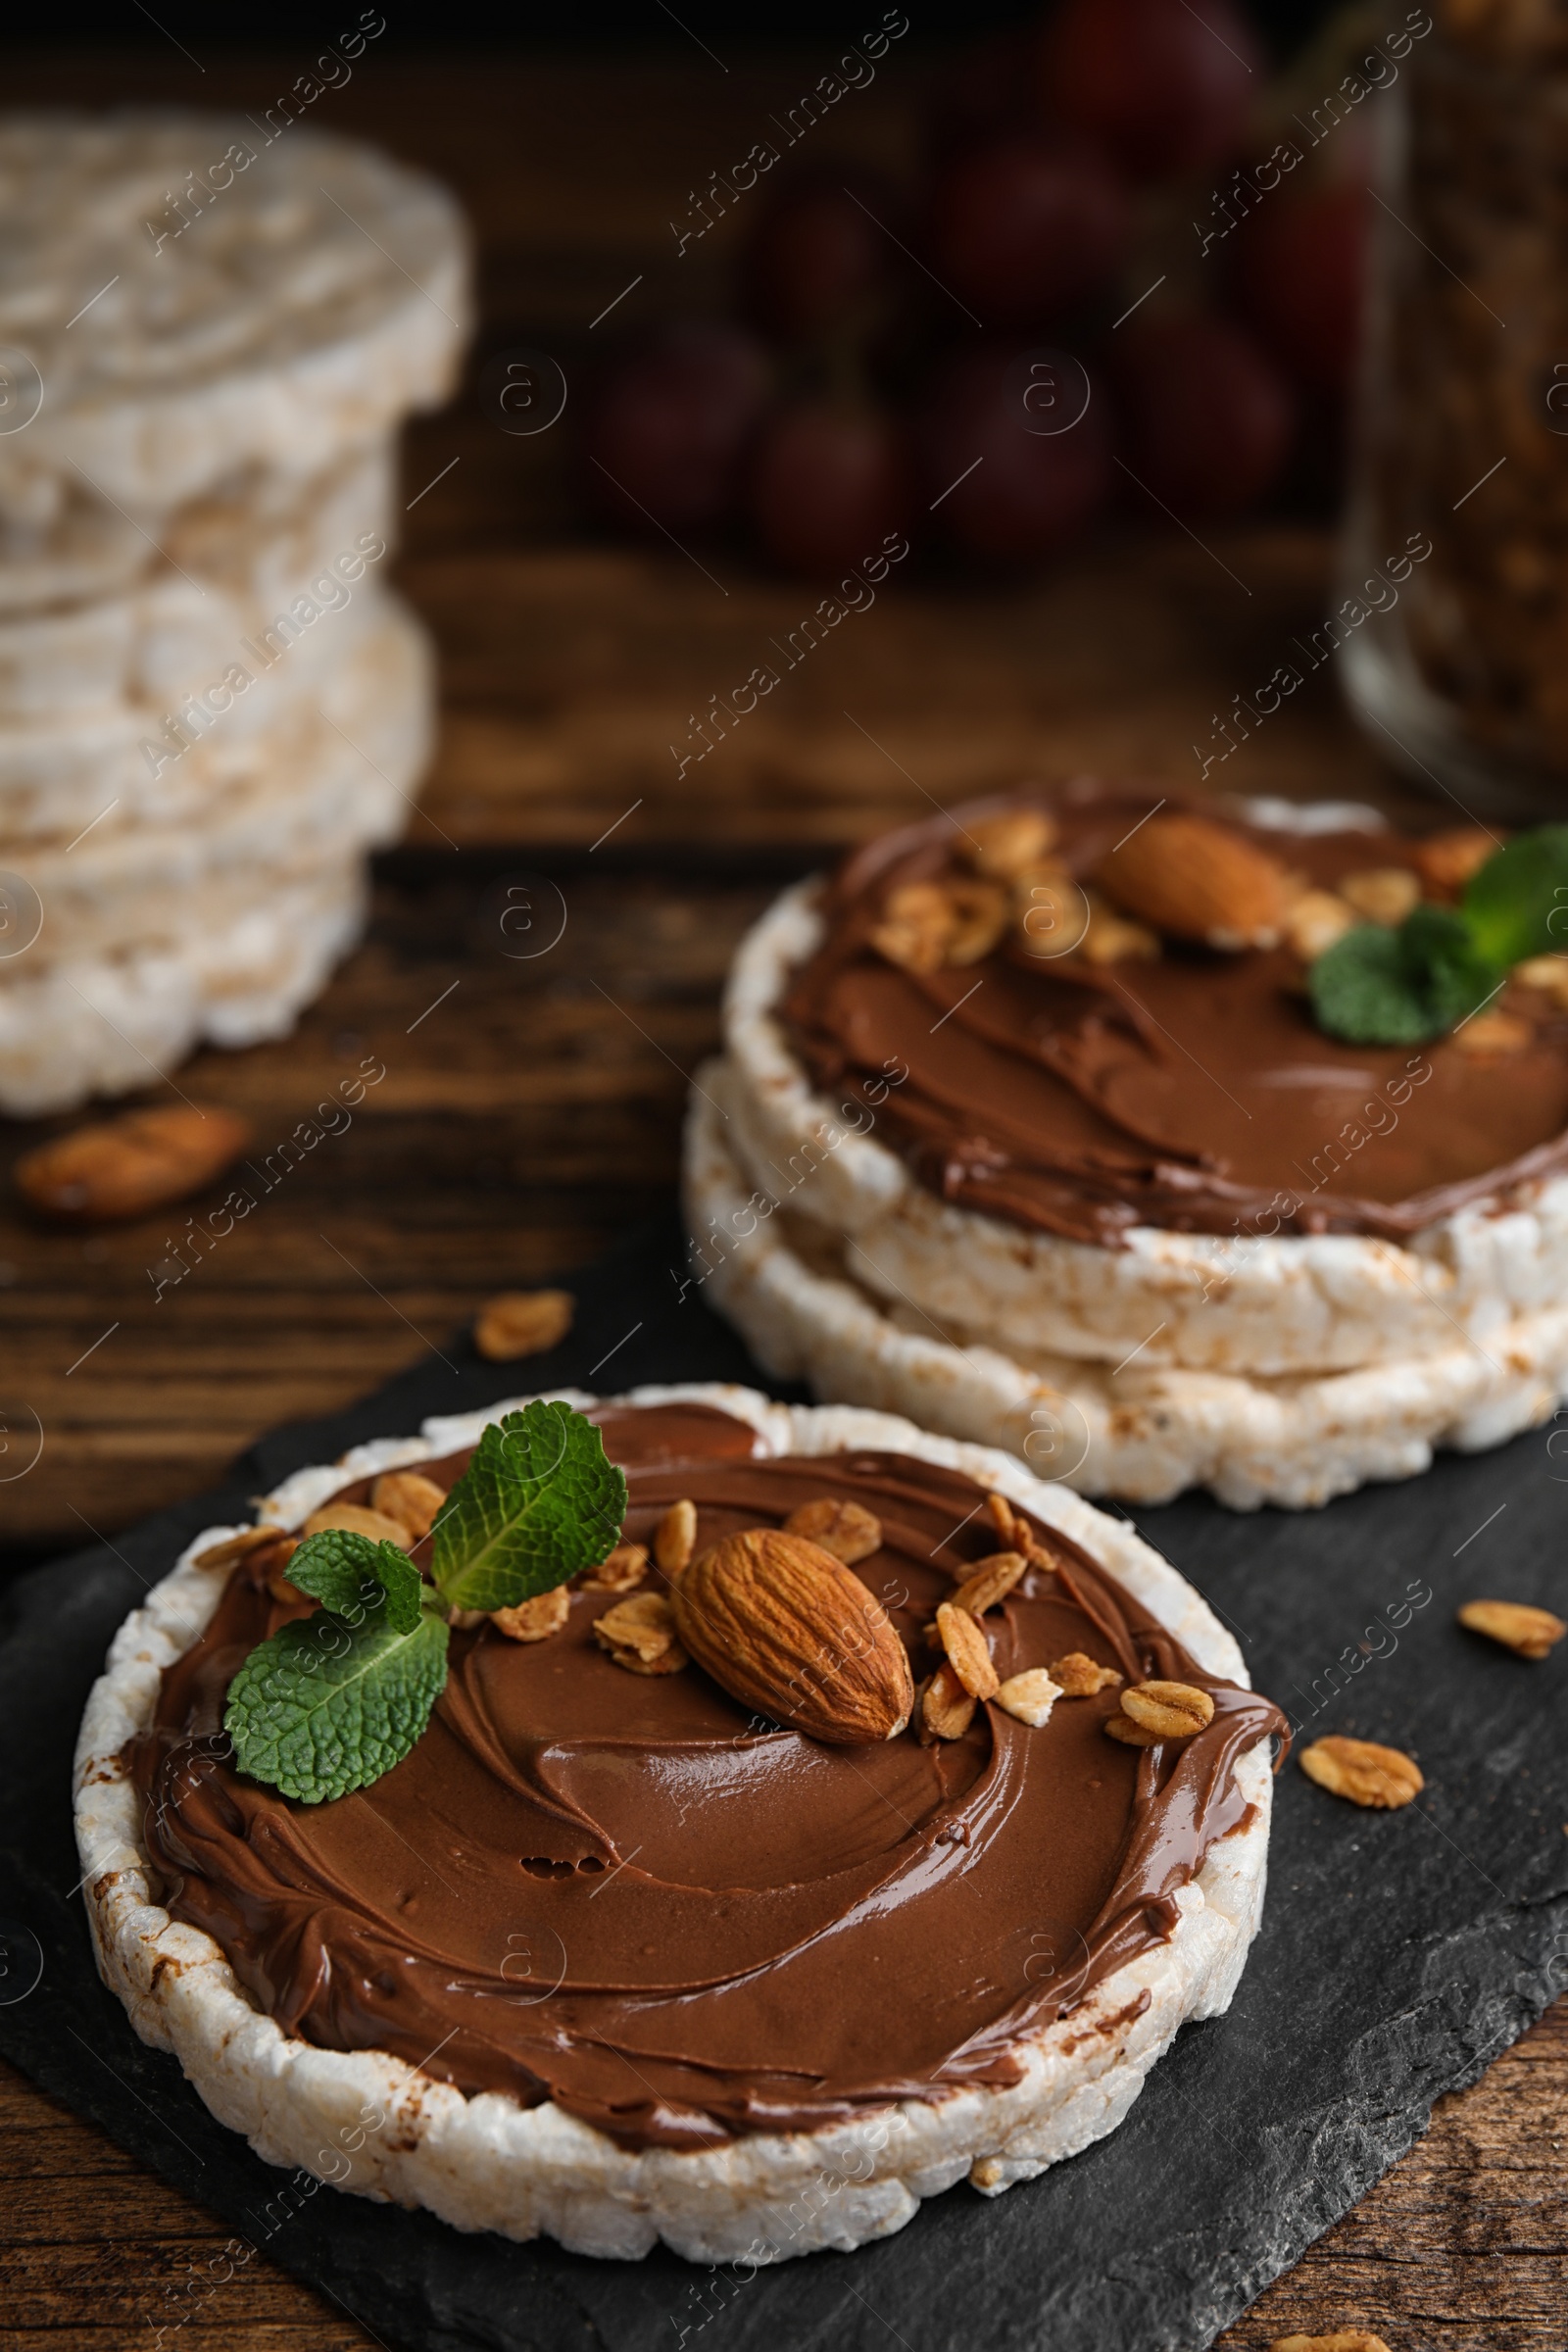 Photo of Puffed rice cakes with chocolate spread, nuts and mint on wooden table